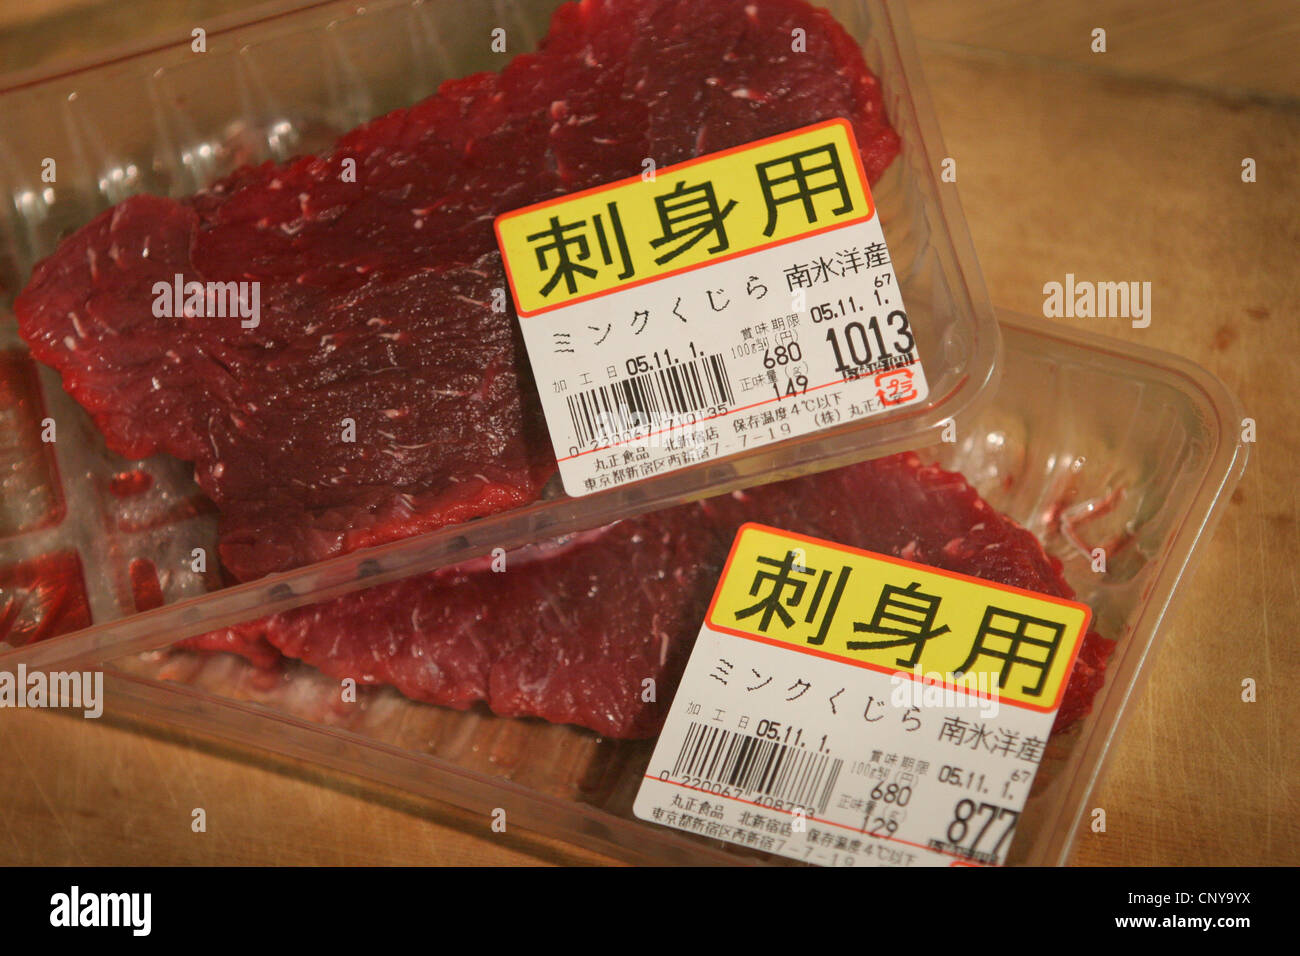 Minke whale meat, in a supermarket packet. Stock Photo